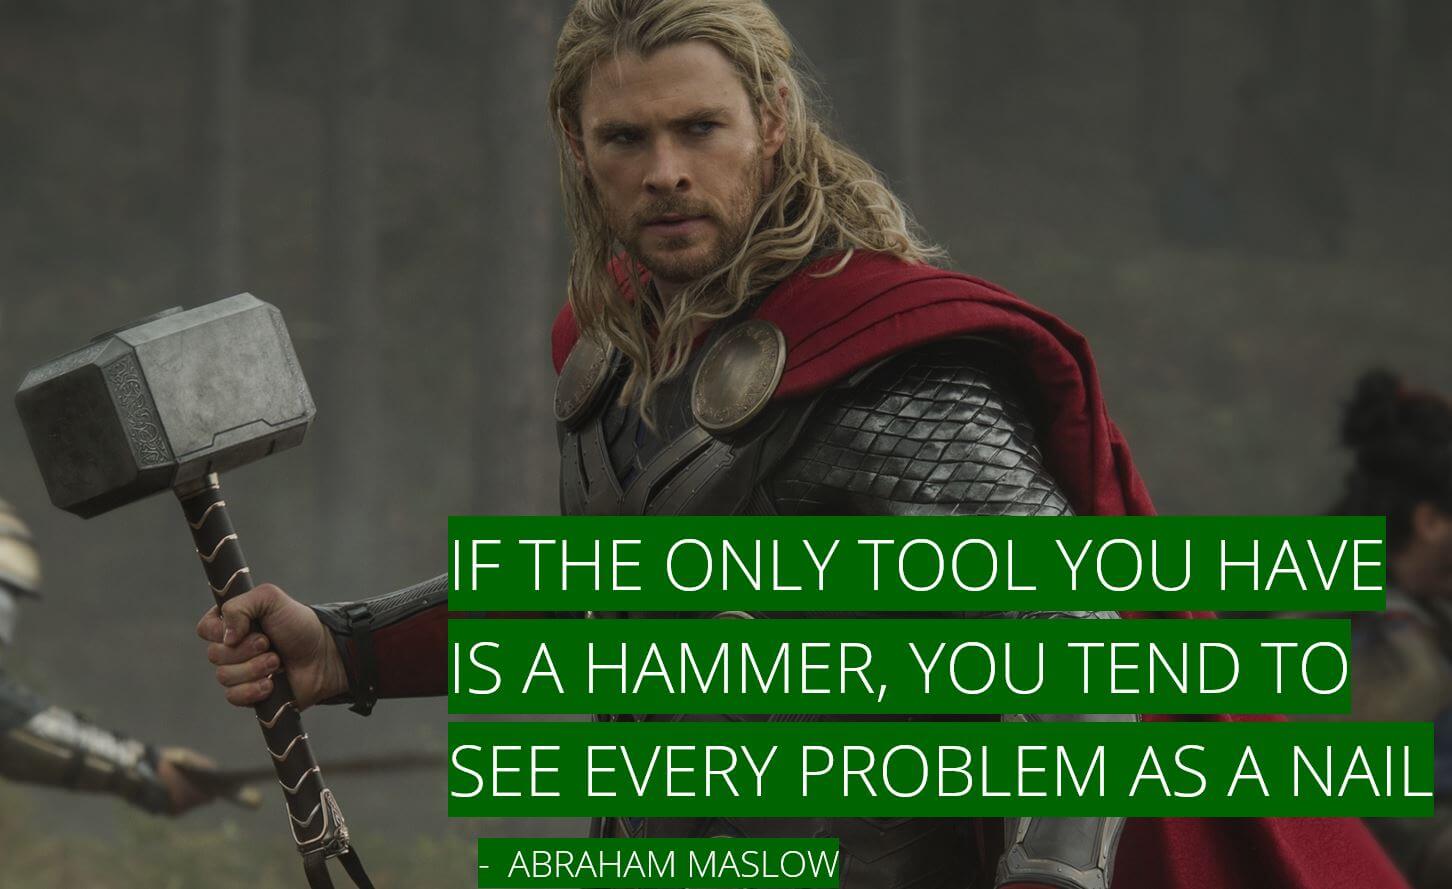 Law of the Instrument - if the only tool you have is a hammer, you tend to see every problem as a nail